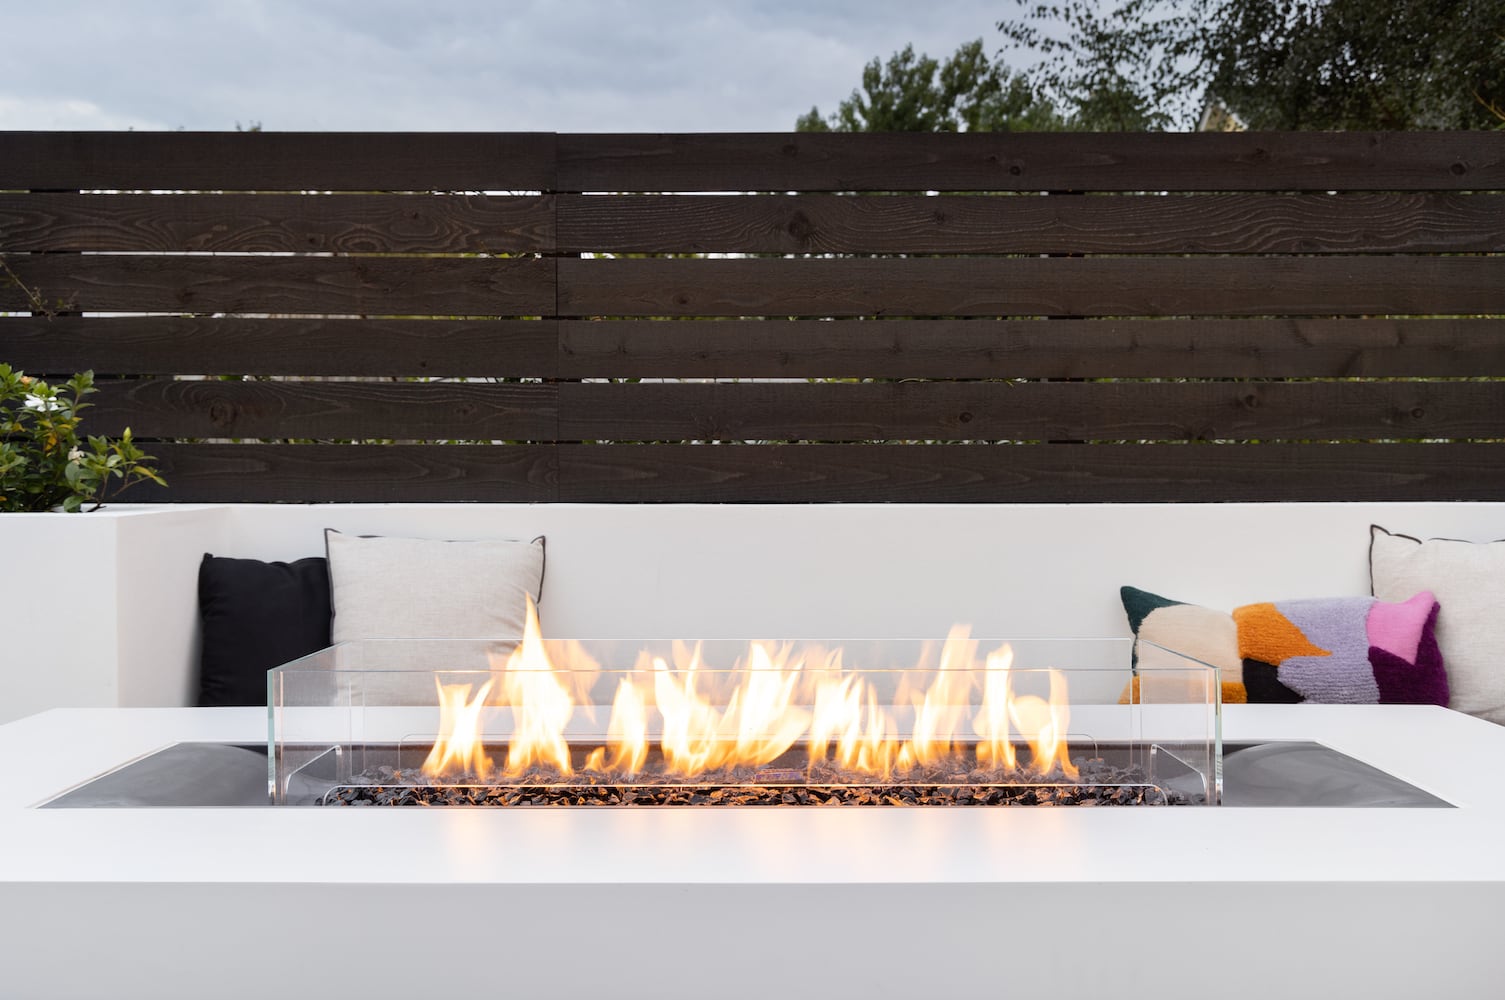 Backyard gas fireplace with custom couch pillows and benches and private fencing